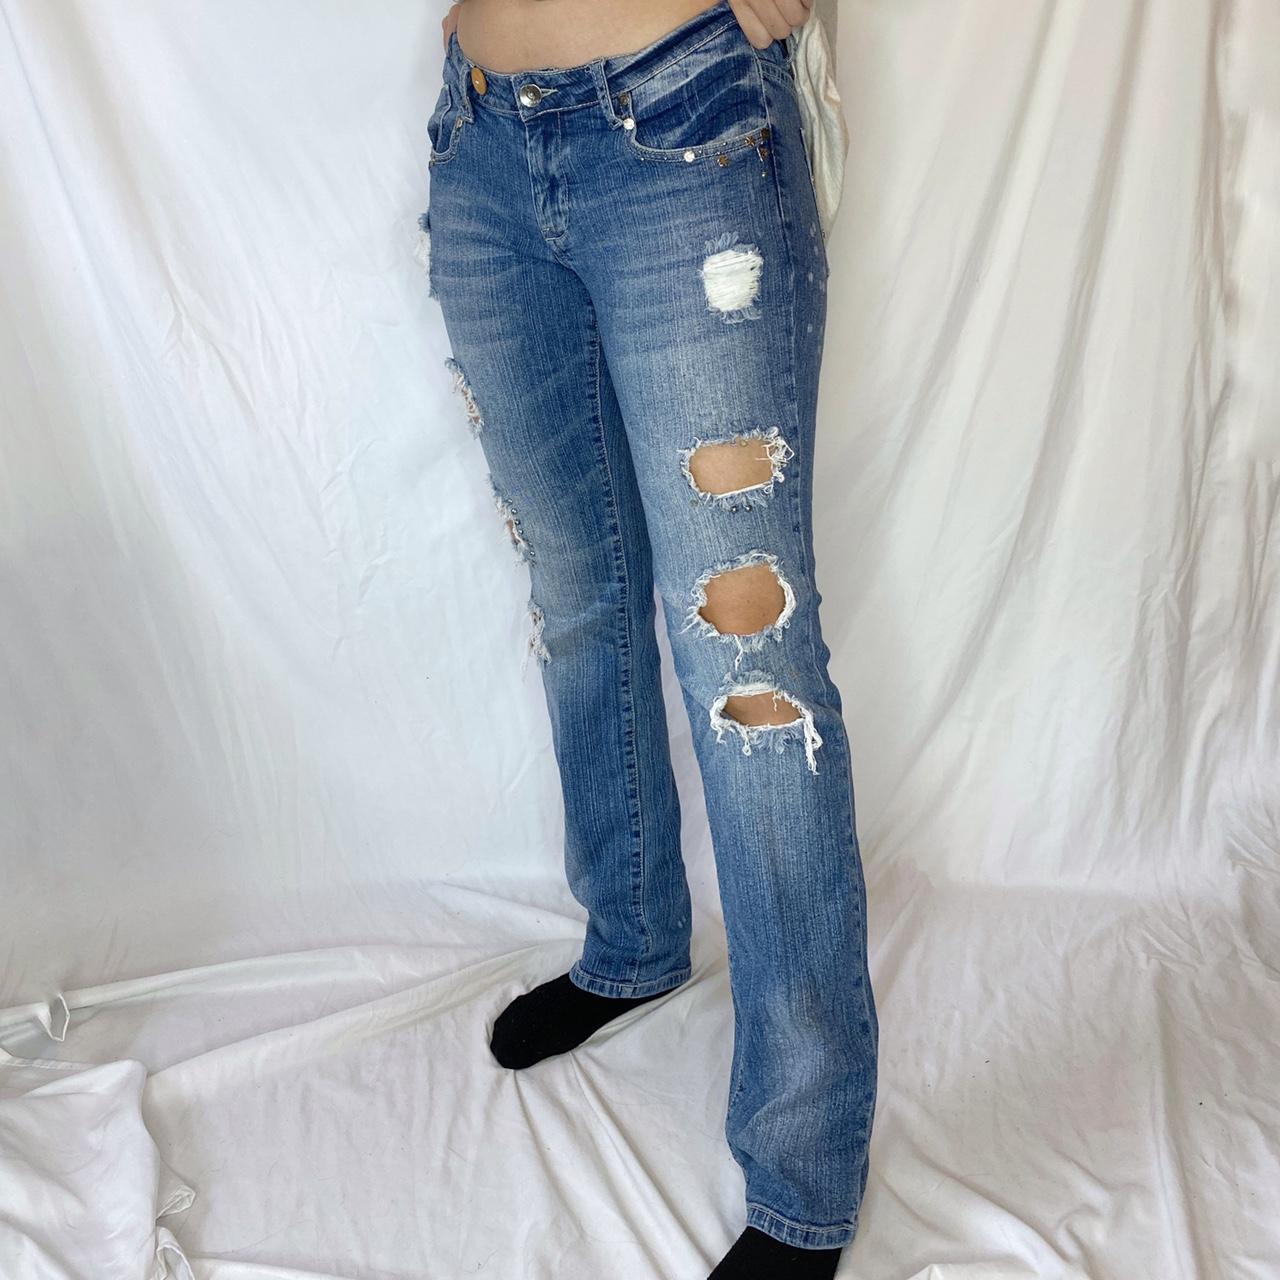 Product Image 2 - cut out low rise jeans

these